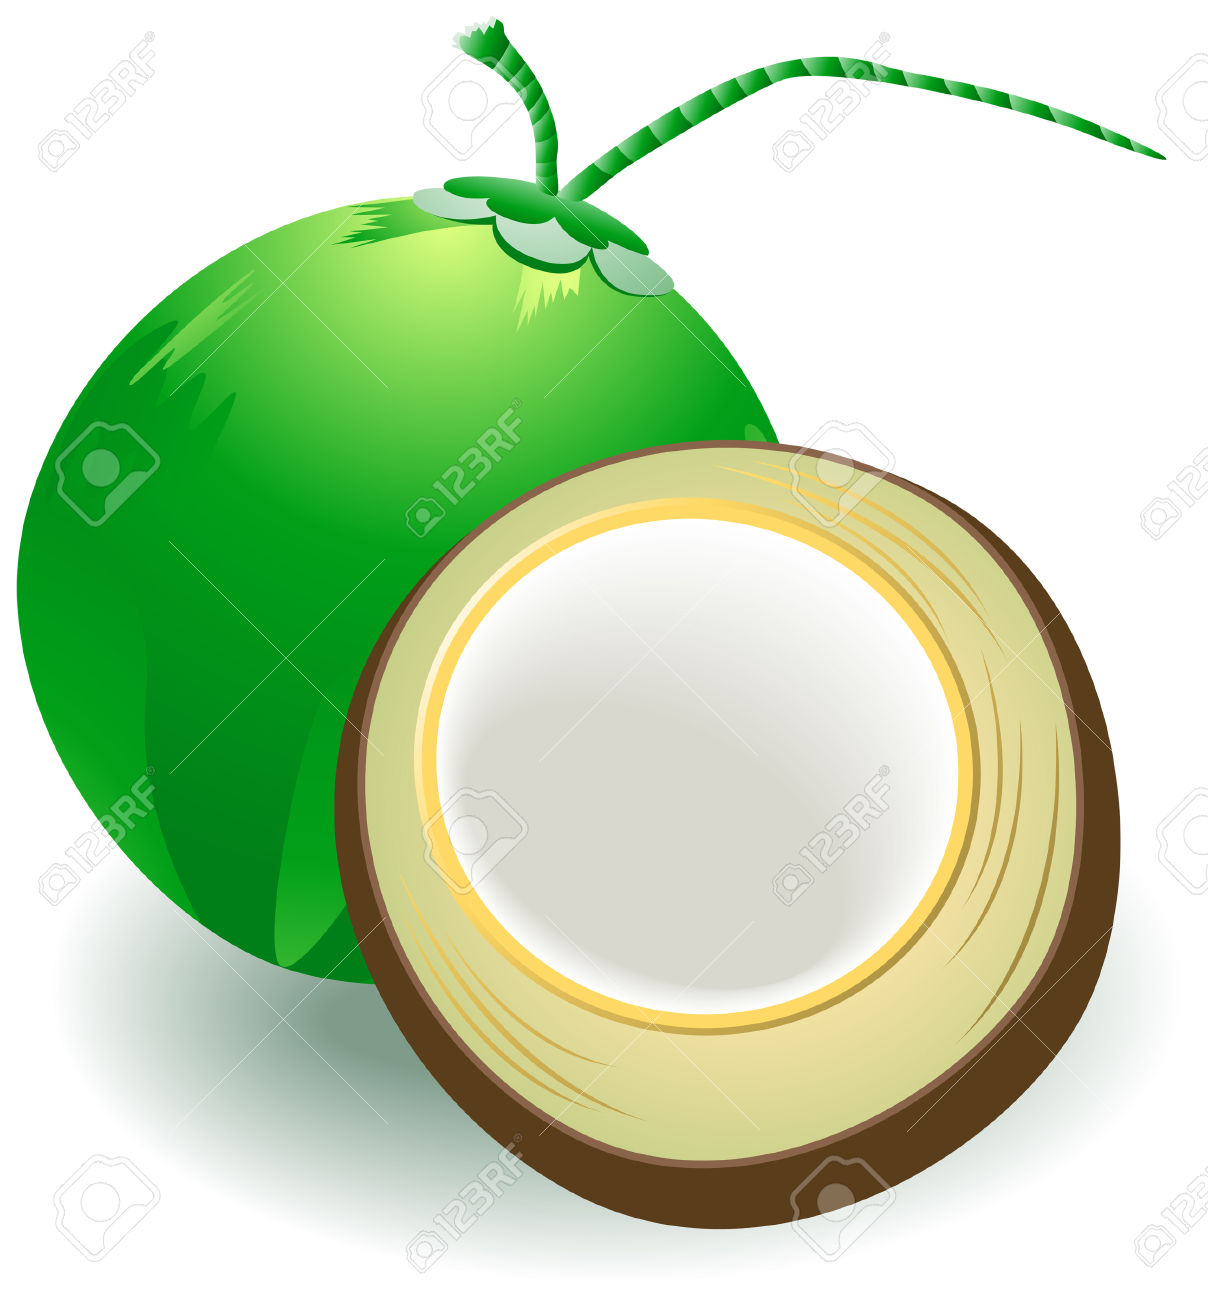 Free download best on. Coconut clipart coconut fruit